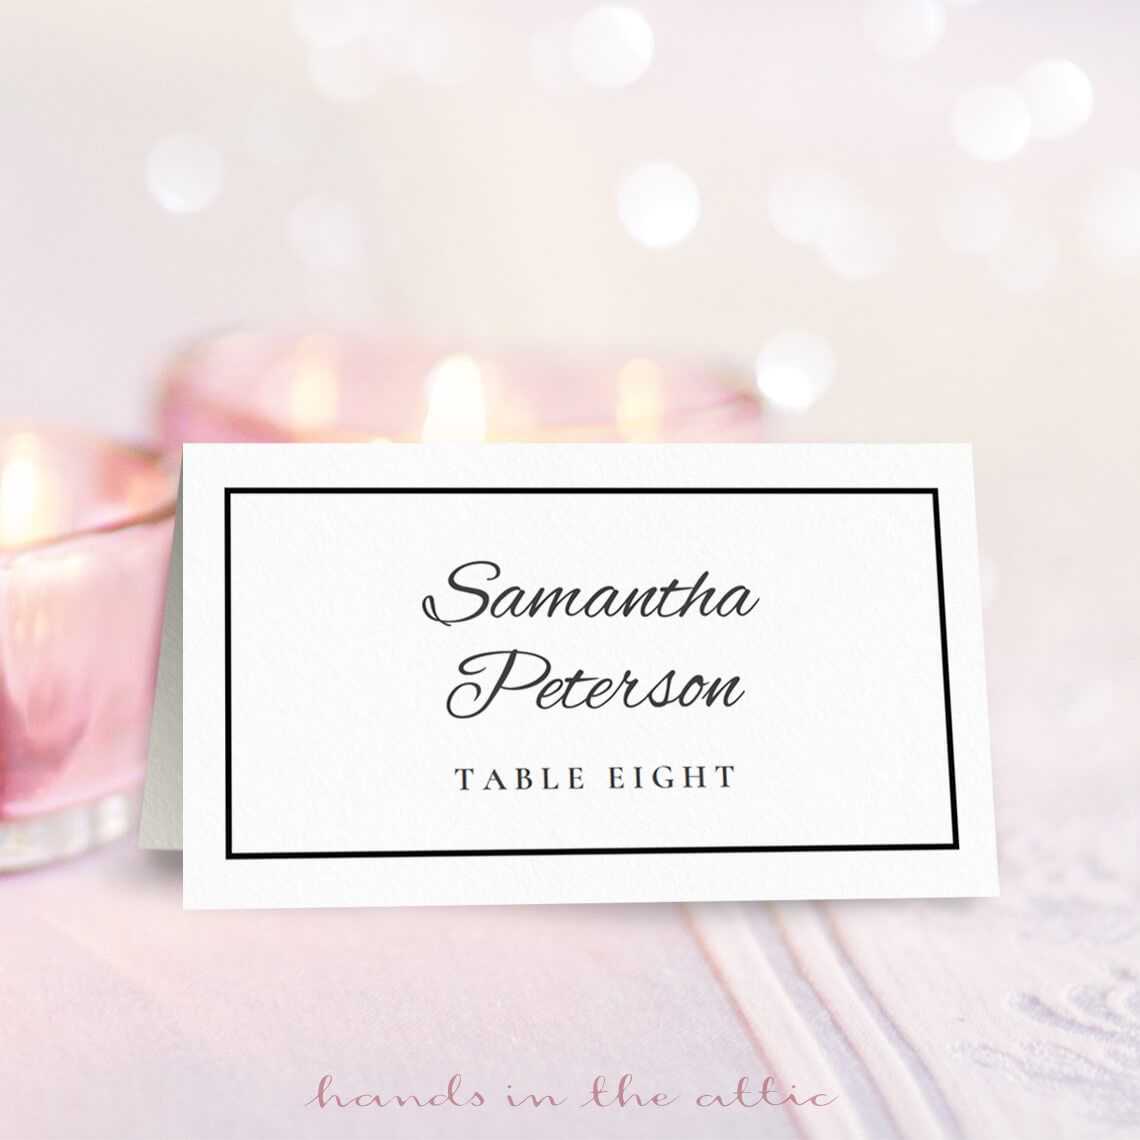 8 Free Wedding Place Card Templates With Free Template For Place Cards 6 Per Sheet